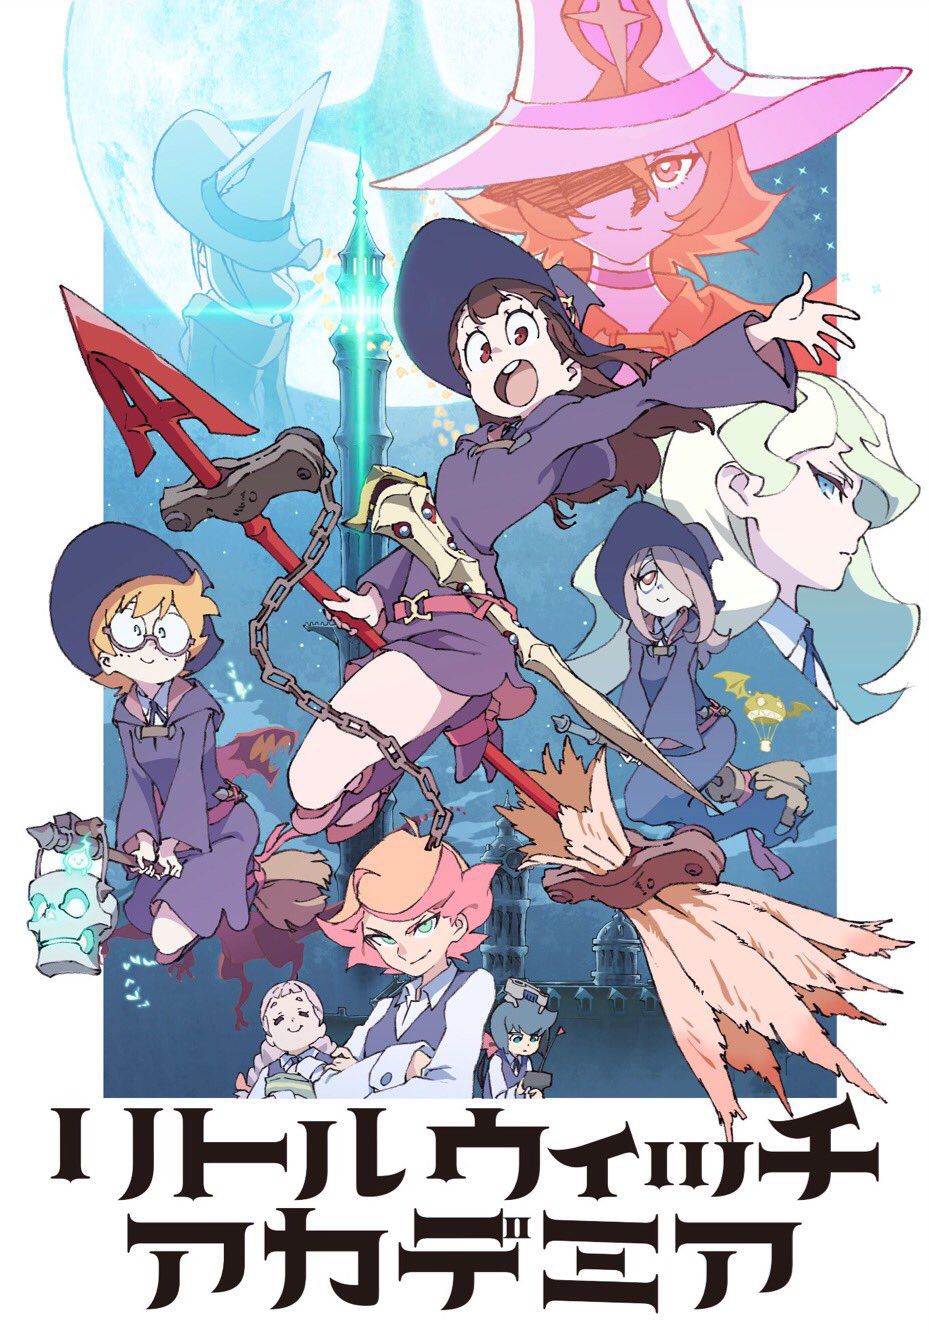 little-witch-academia-tv-anime-visual-02